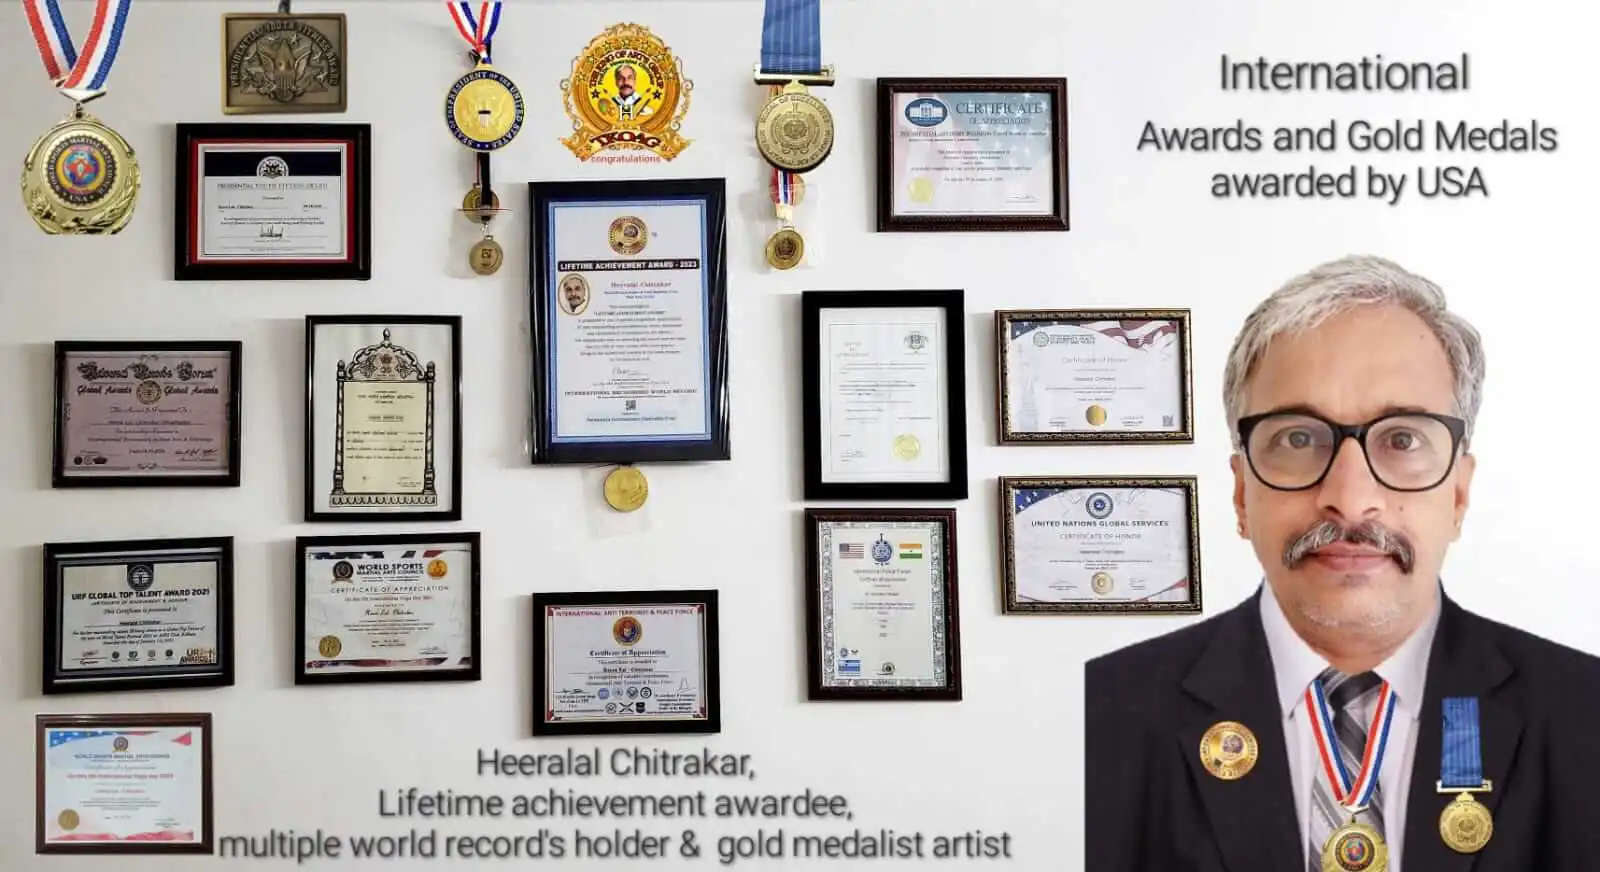 Profile picture of Heeralal Chitrakar along with a number of medals and awards hanged on wall behind